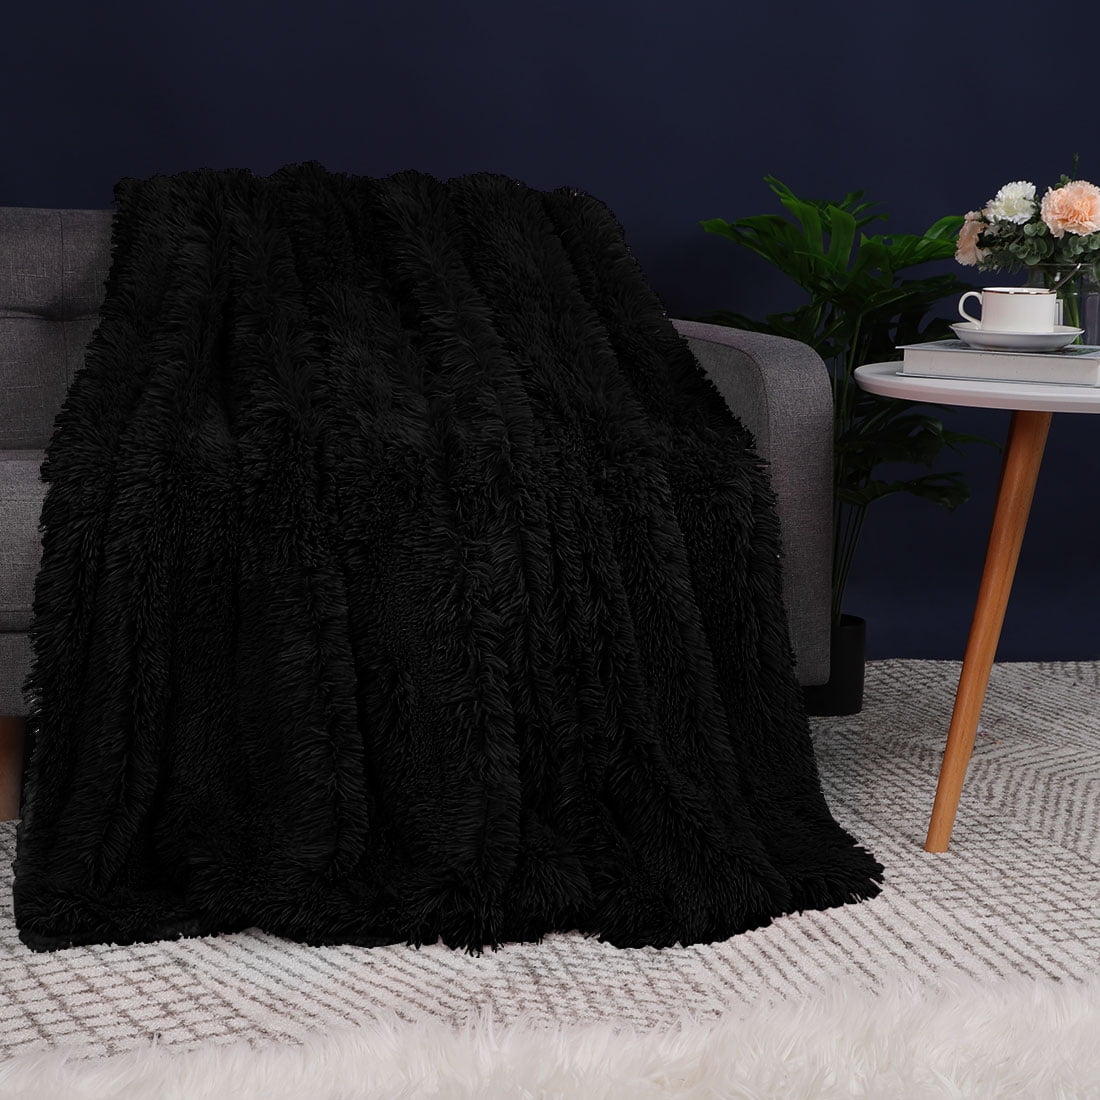 Details about   Sherpa Fleece Throw Twin Blanket Super Soft Faux Fur Plush for Couch Bed Sofa us 